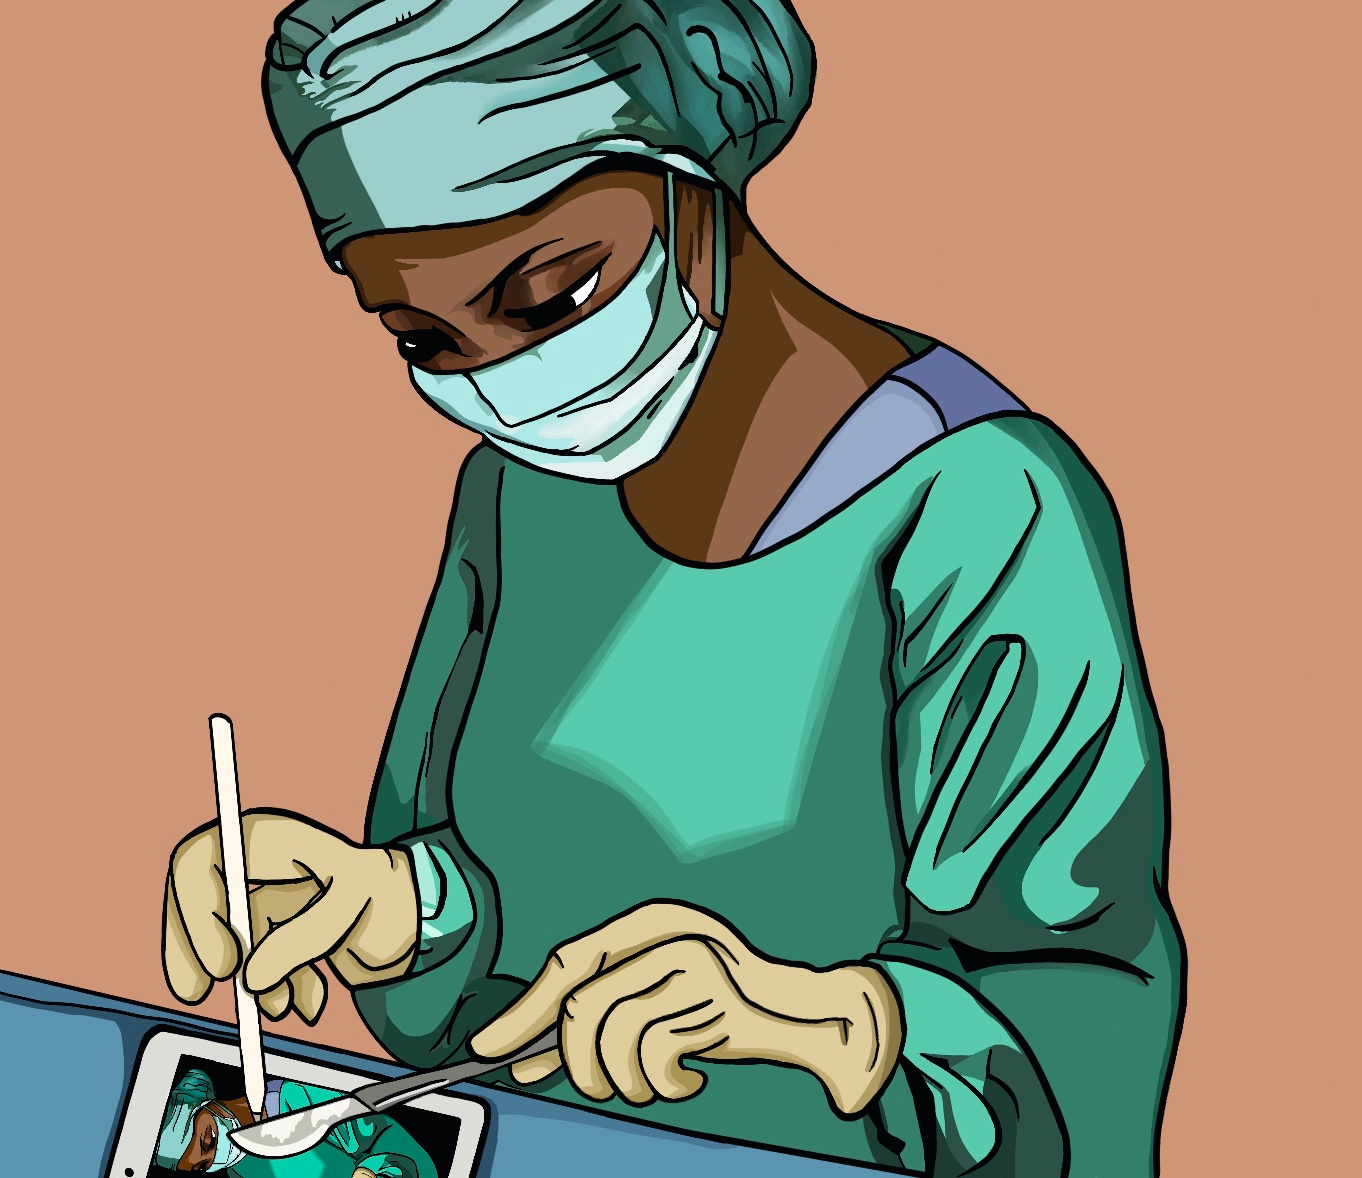 black surgeon with surgical cap and surgical mask looking down